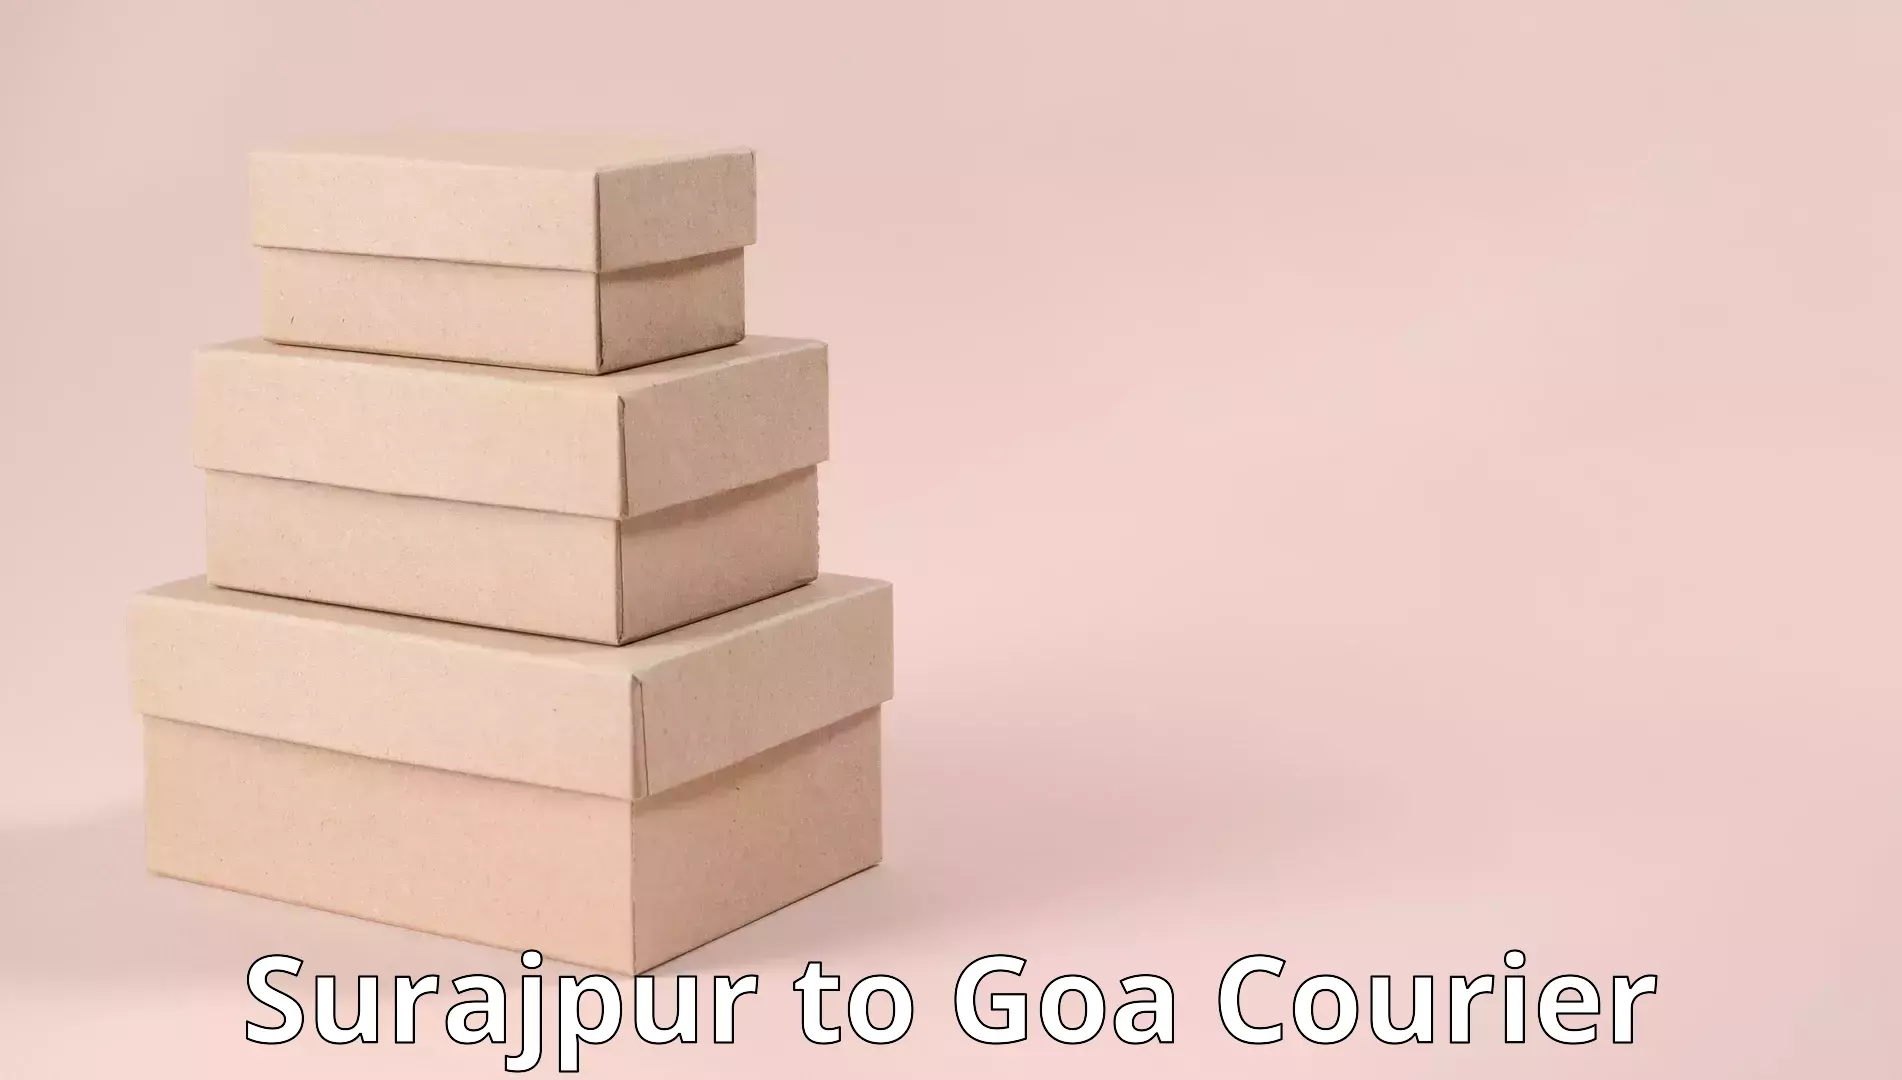 Hassle-free relocation Surajpur to Goa